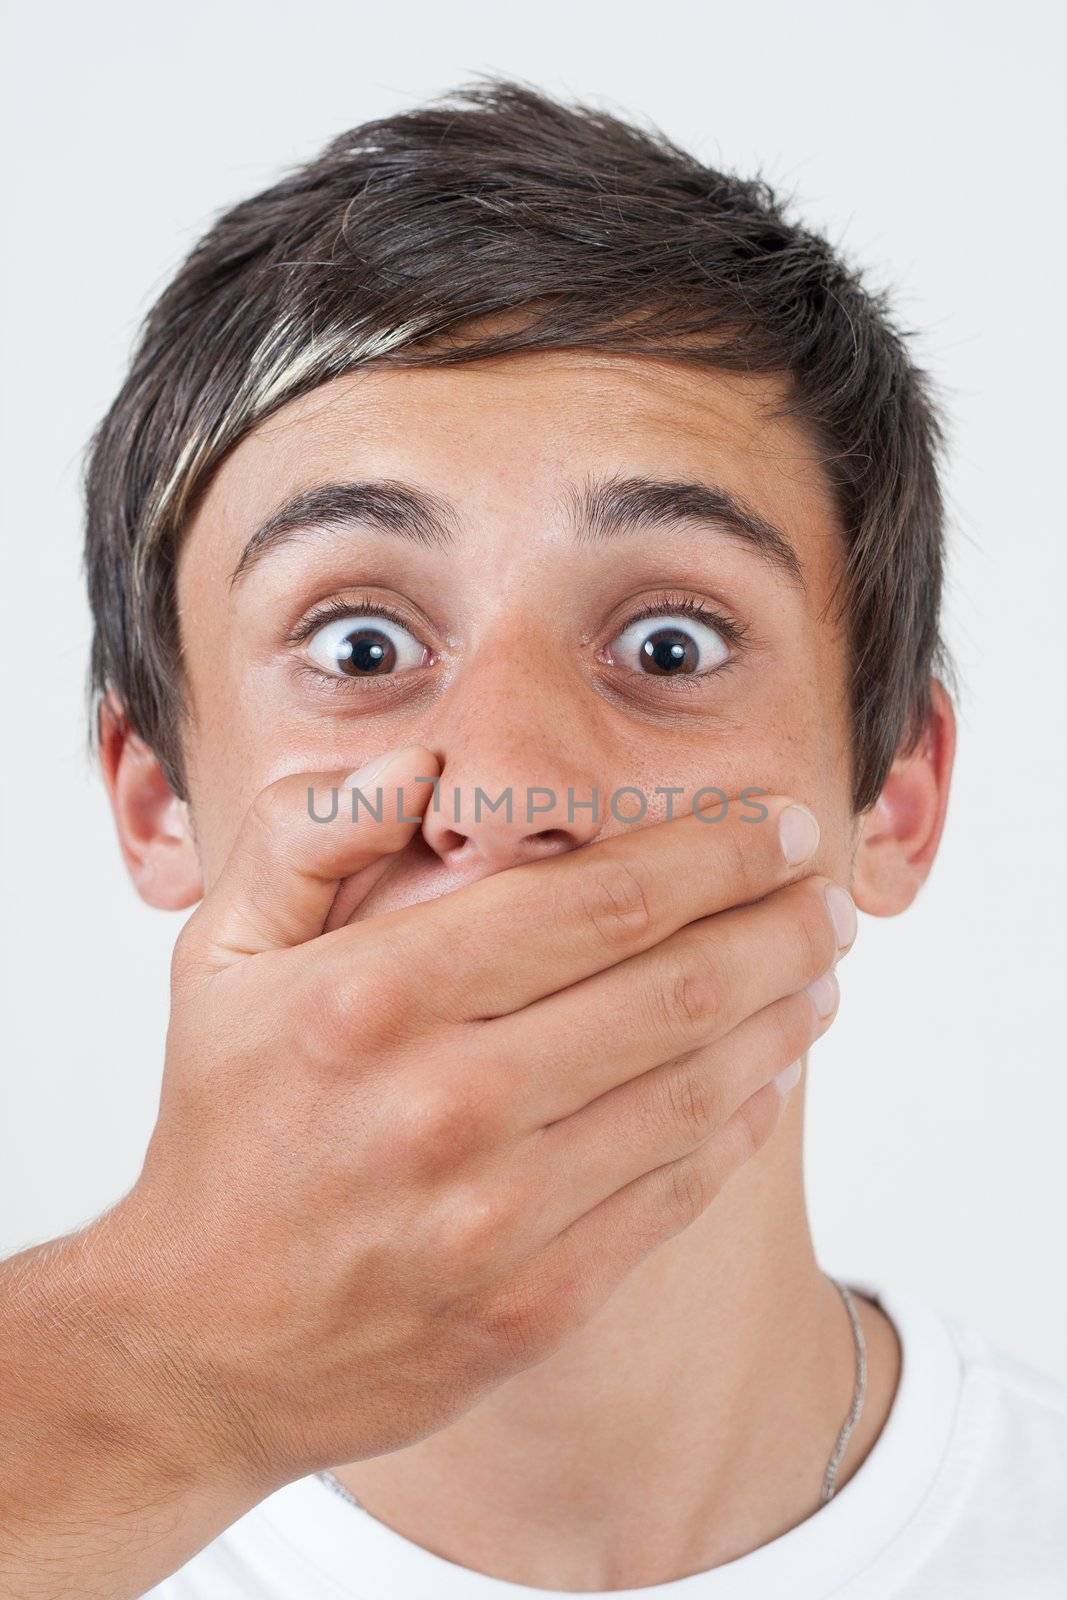 afraid swarthy victim man with hand covering his mouth